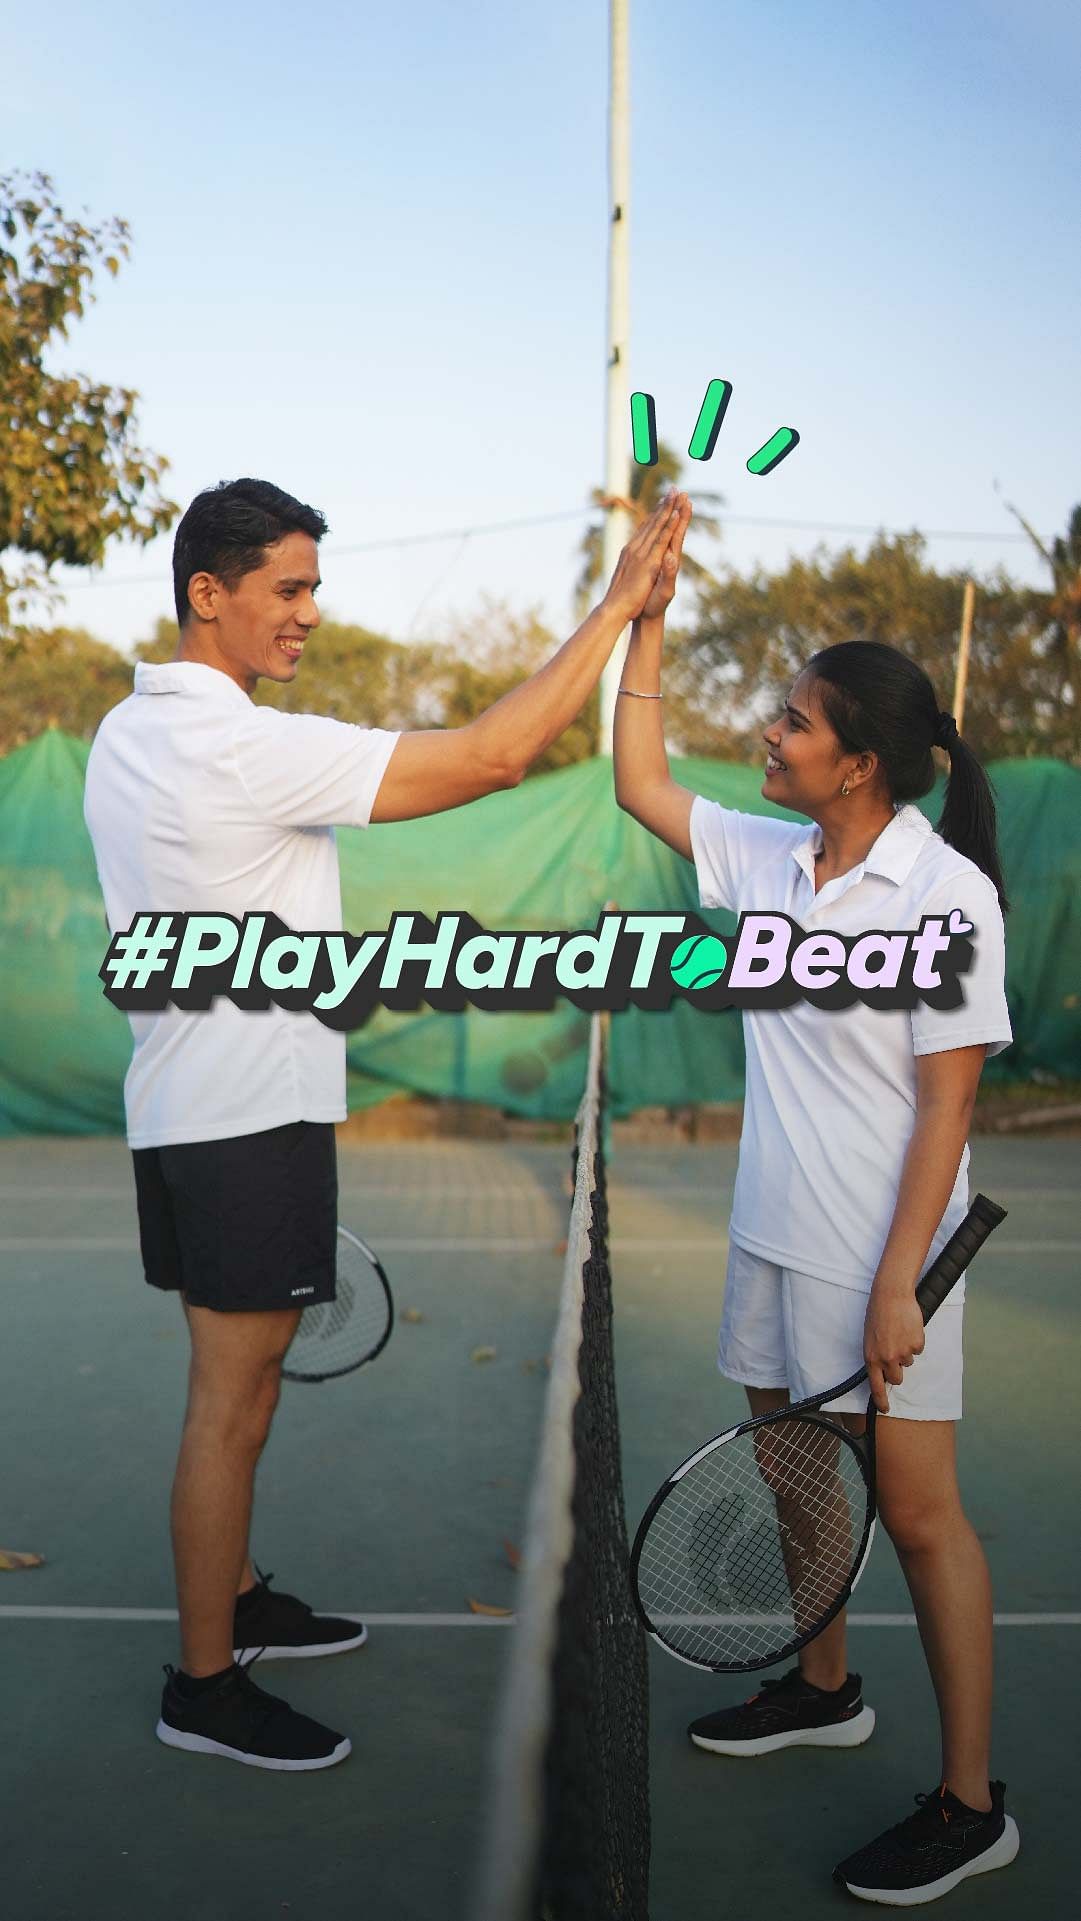 Find your #Playtonic relationship on the court